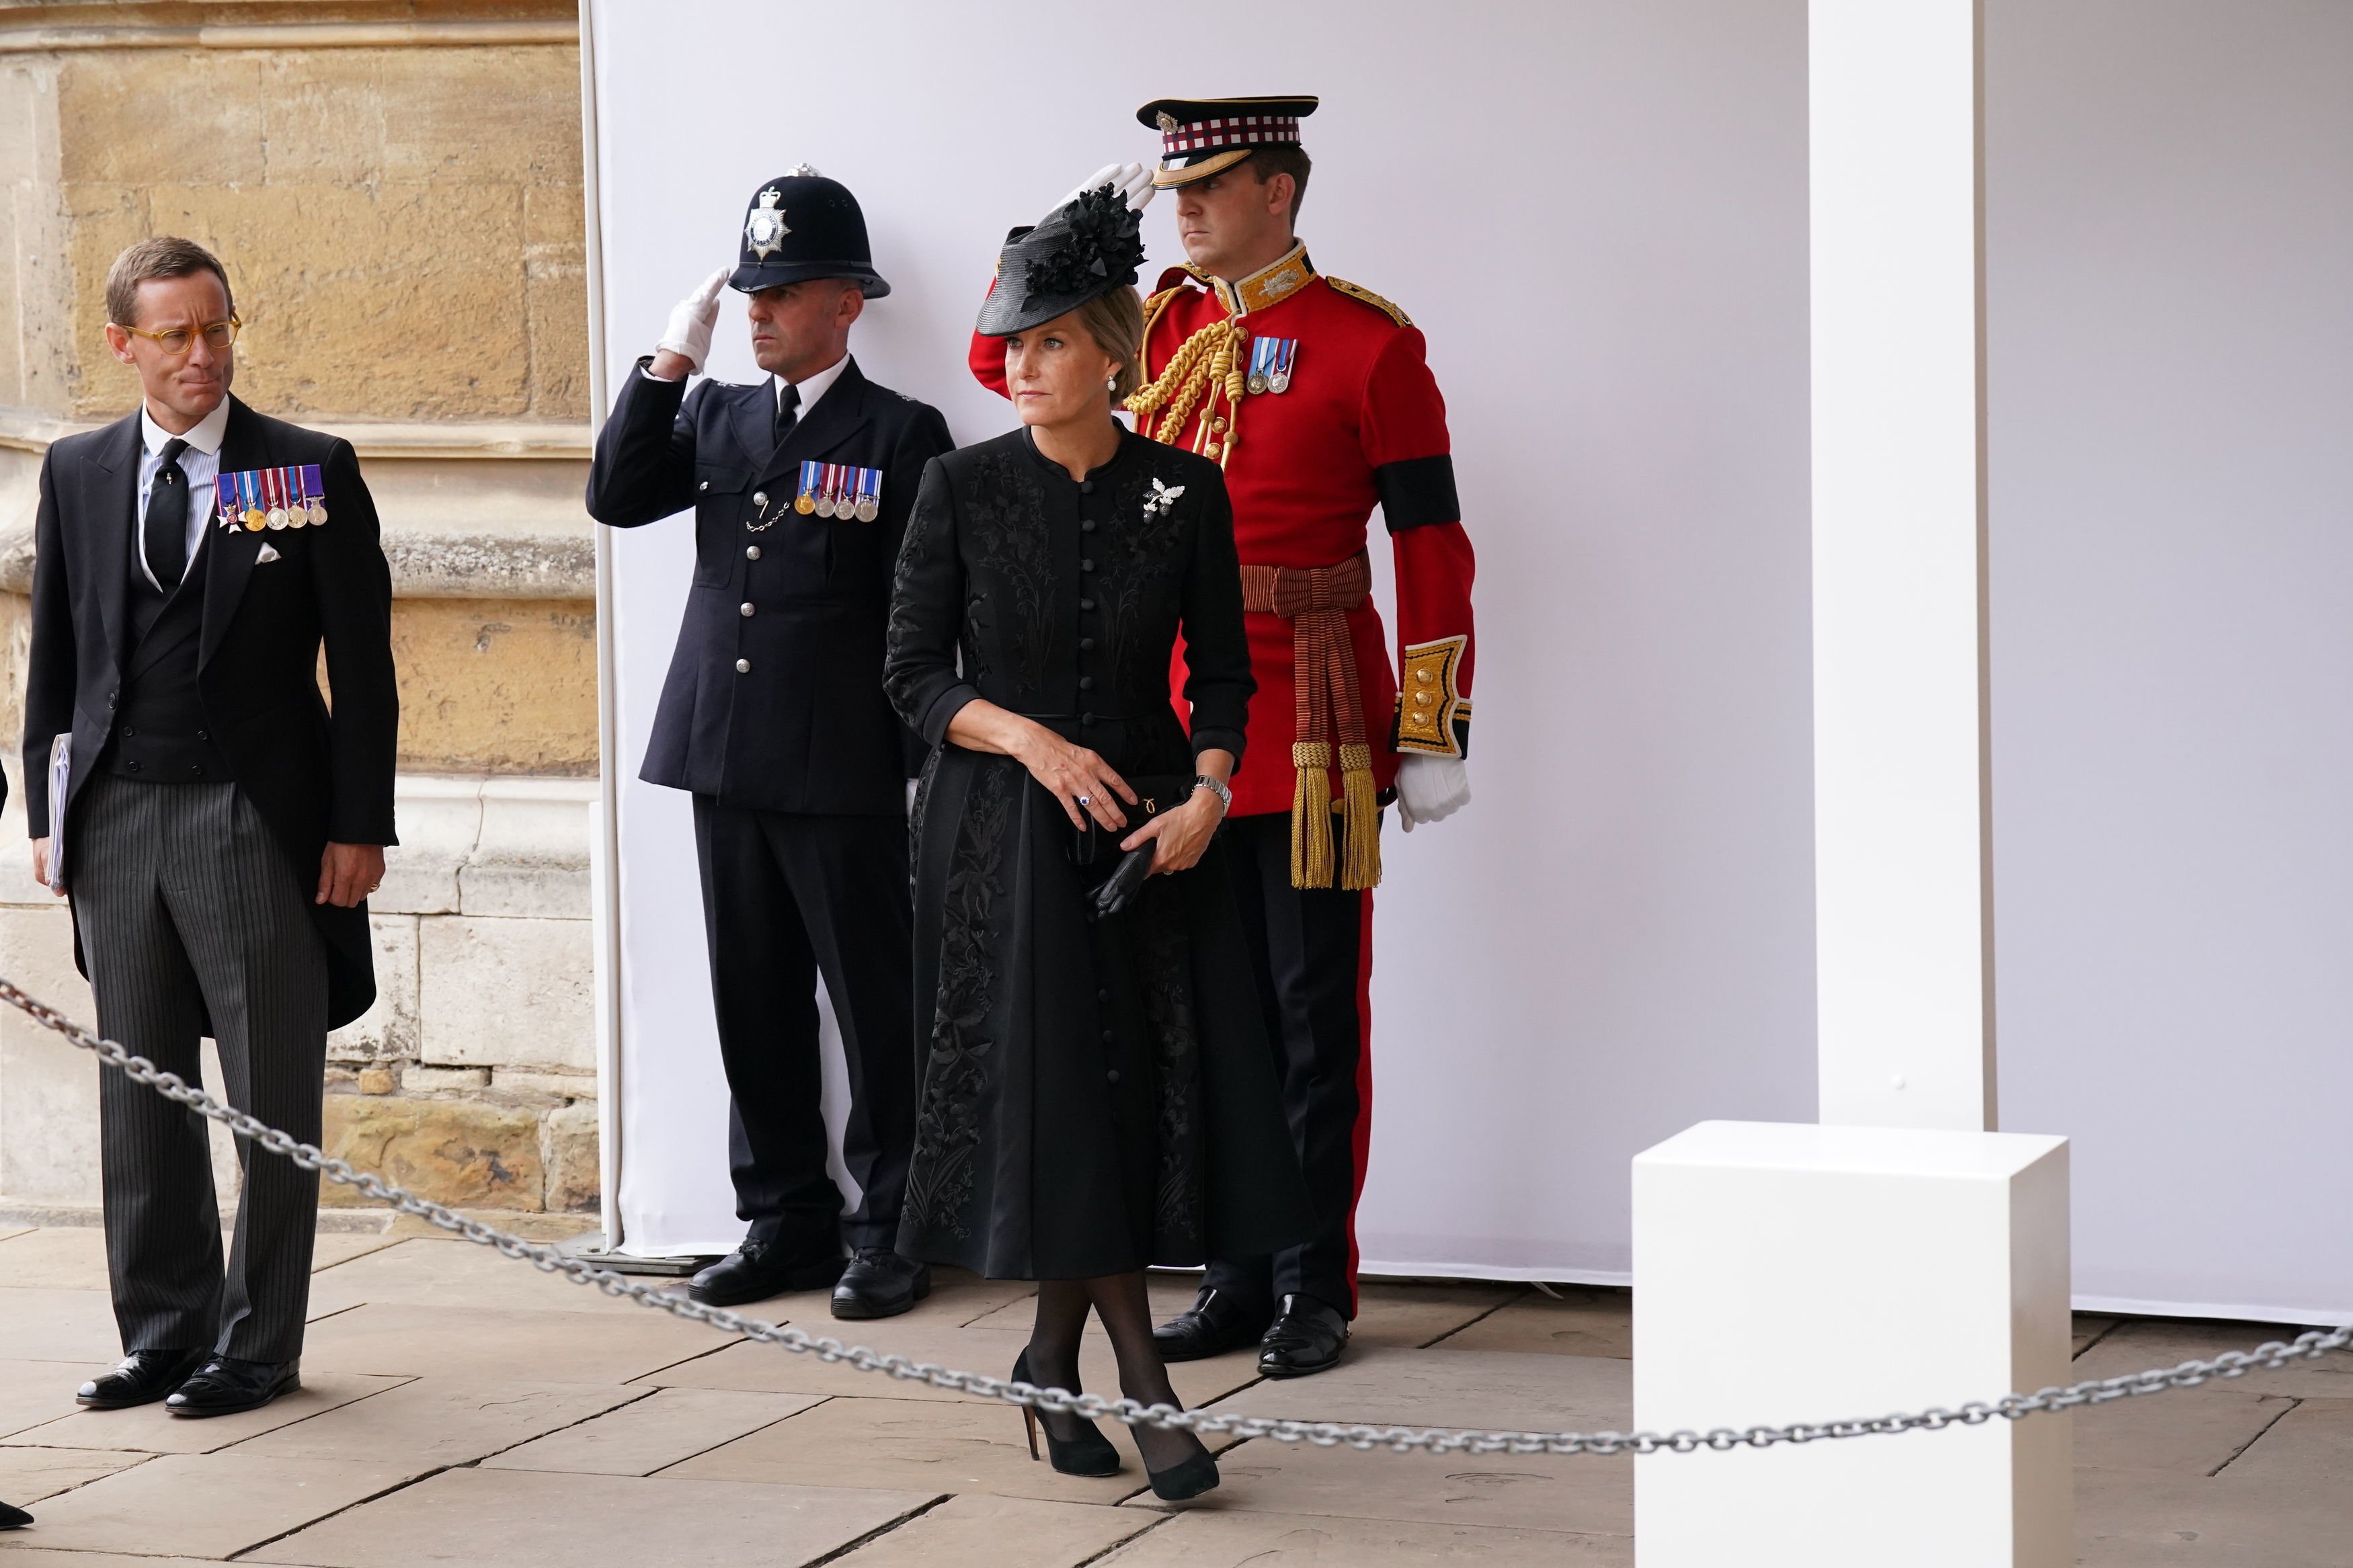 Sophie Wessex at the Queen's state funeral at Westminster Abbey in 2022. | Source: Getty Images